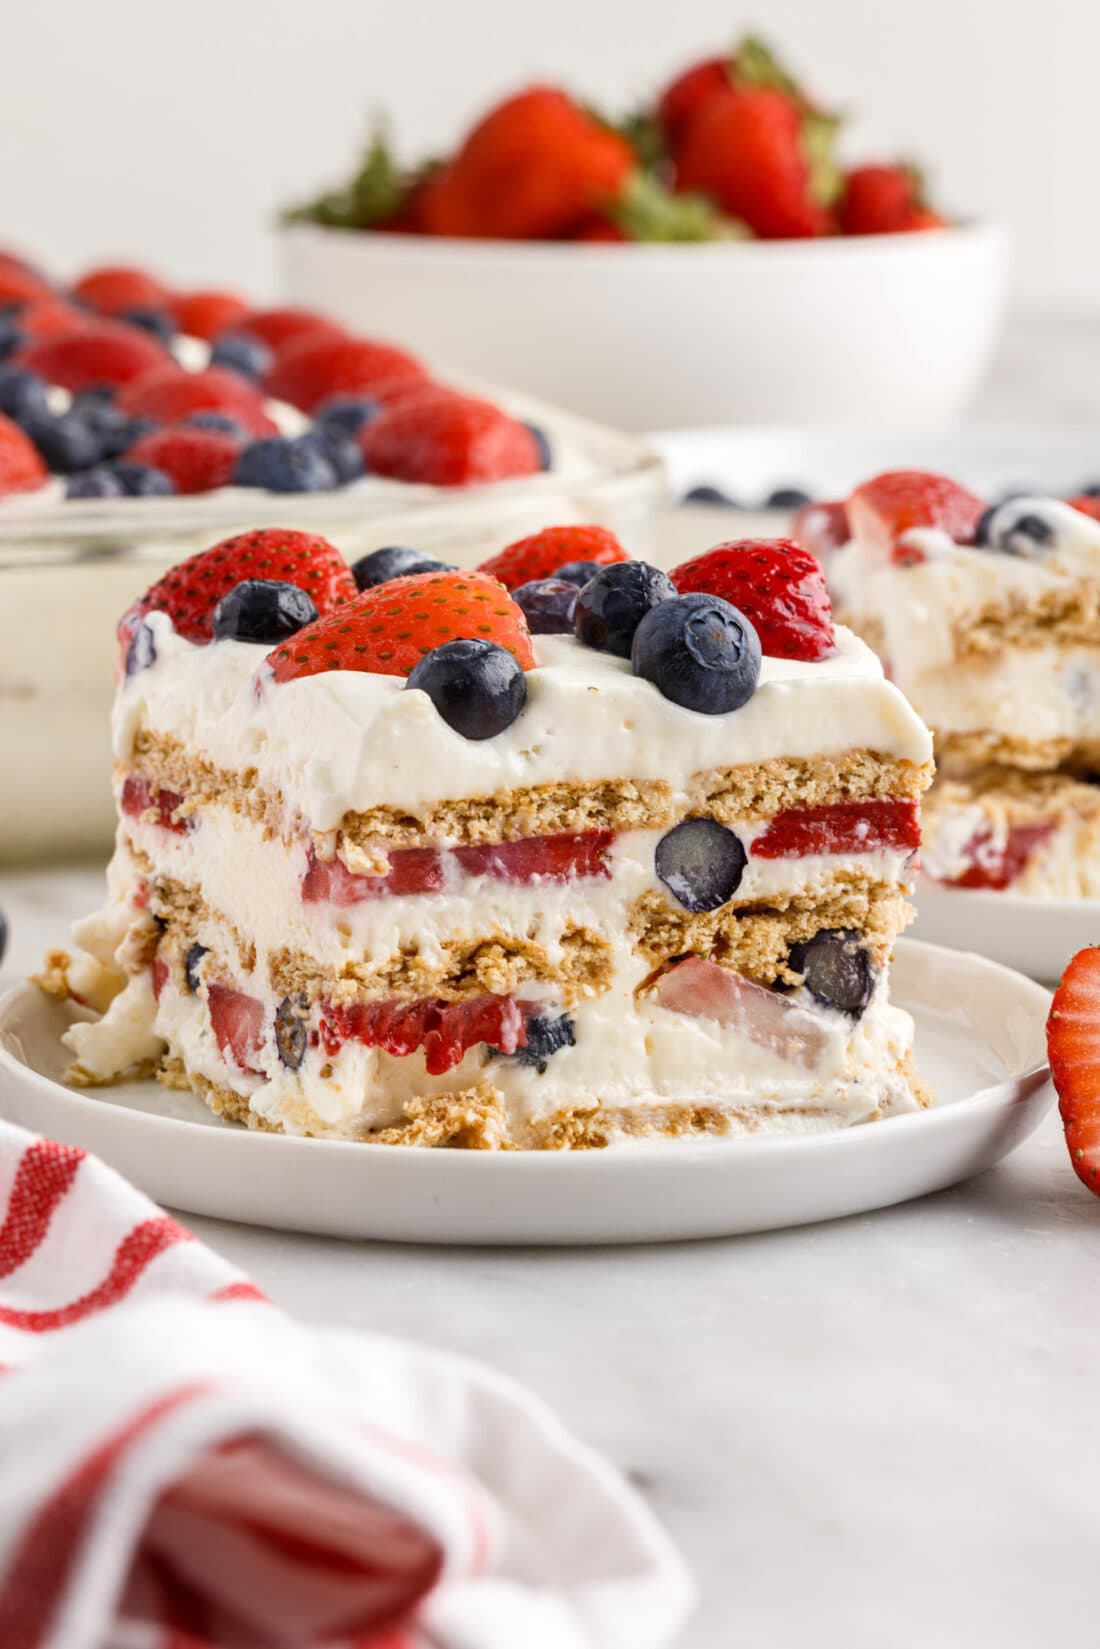 Slice of Mixed Berry Icebox Cake on a plate